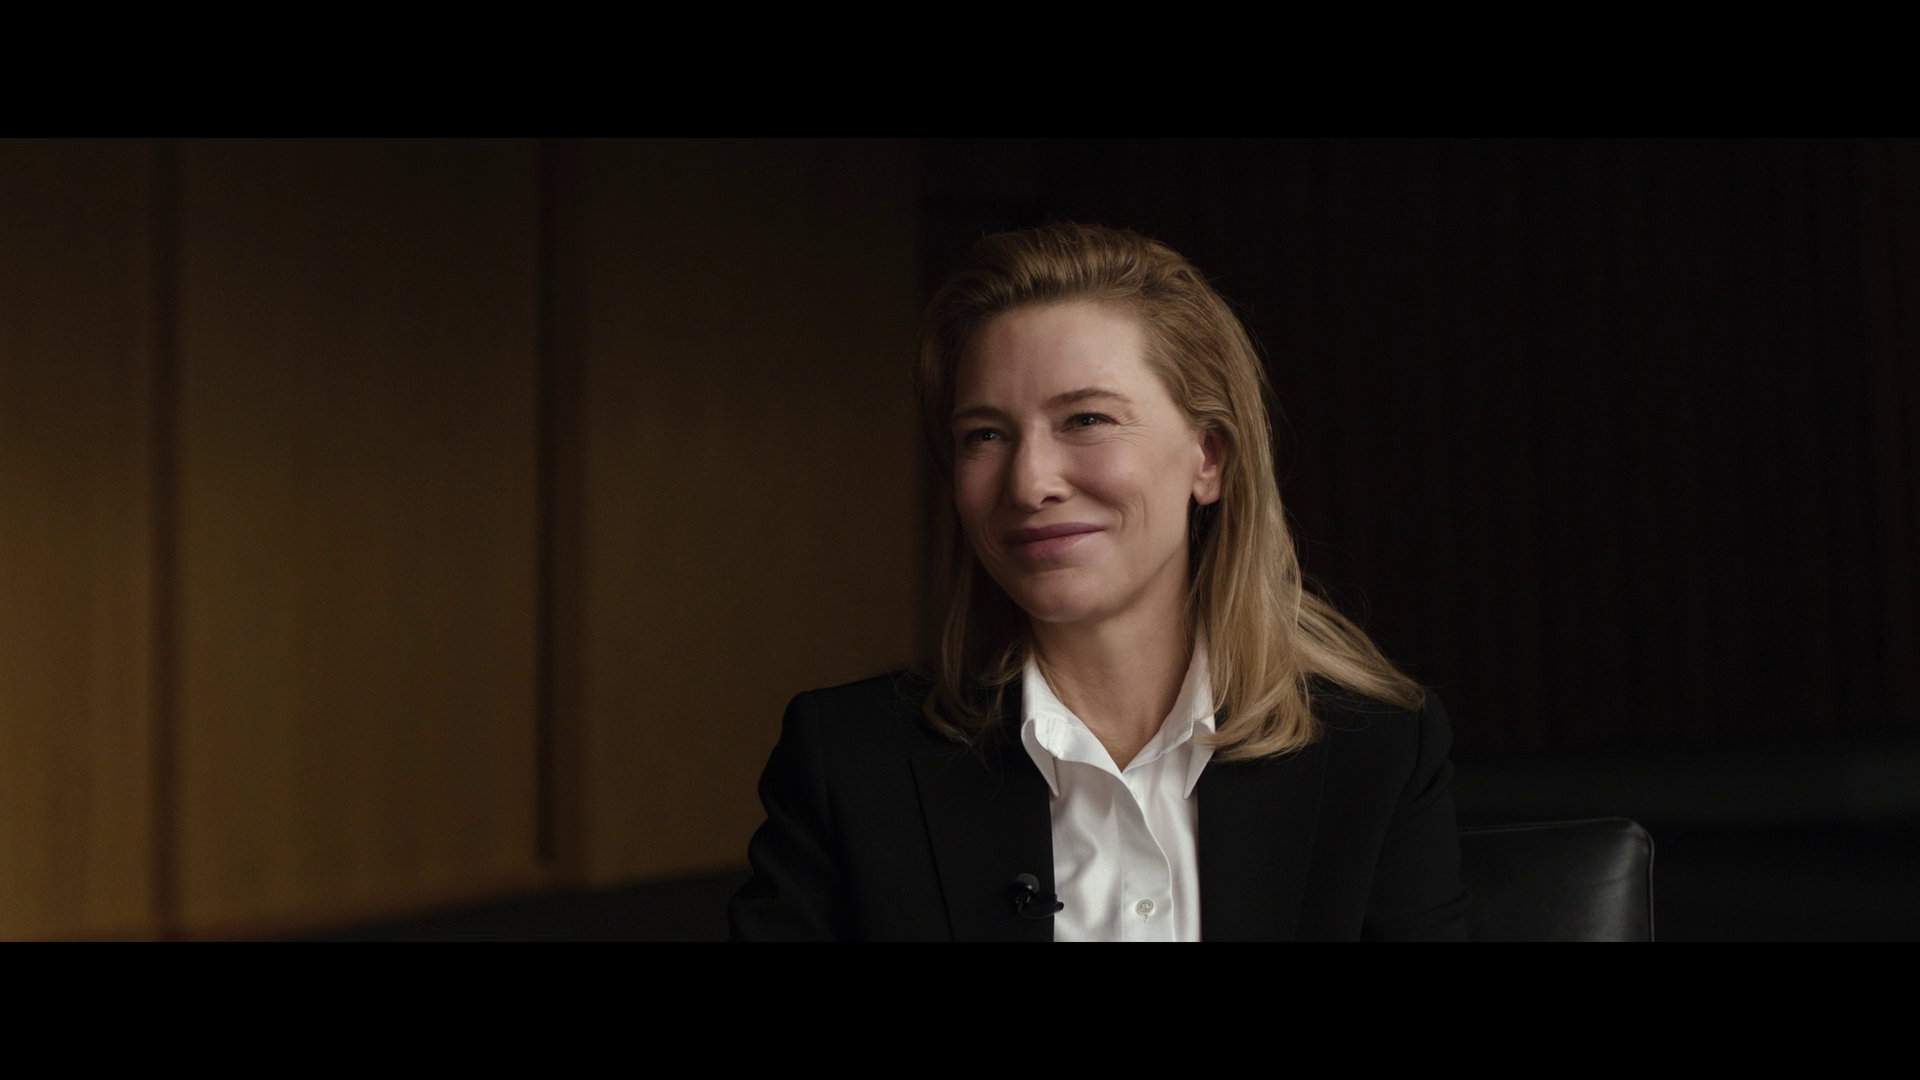 Lydia Tár (Cate Blanchett) concludes her interview with Adam Gopnik (himself) at The New Yorker Festival via Tár (2022), Universal Pictures